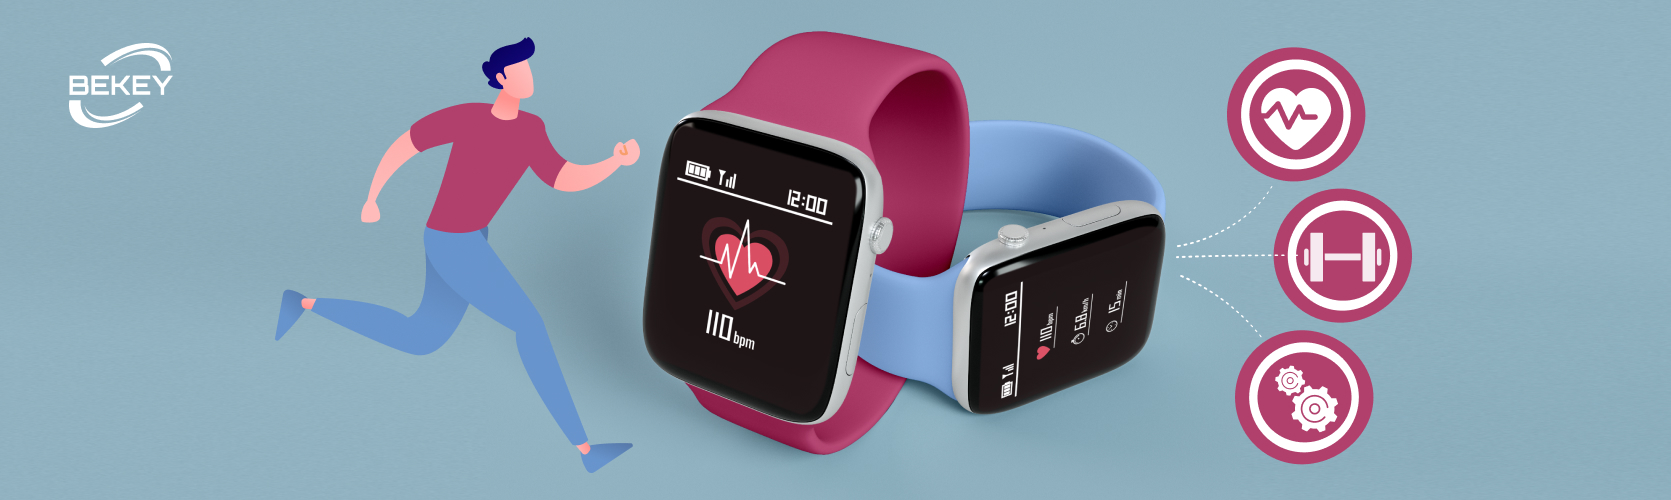 Wearable technology devices in healthcare